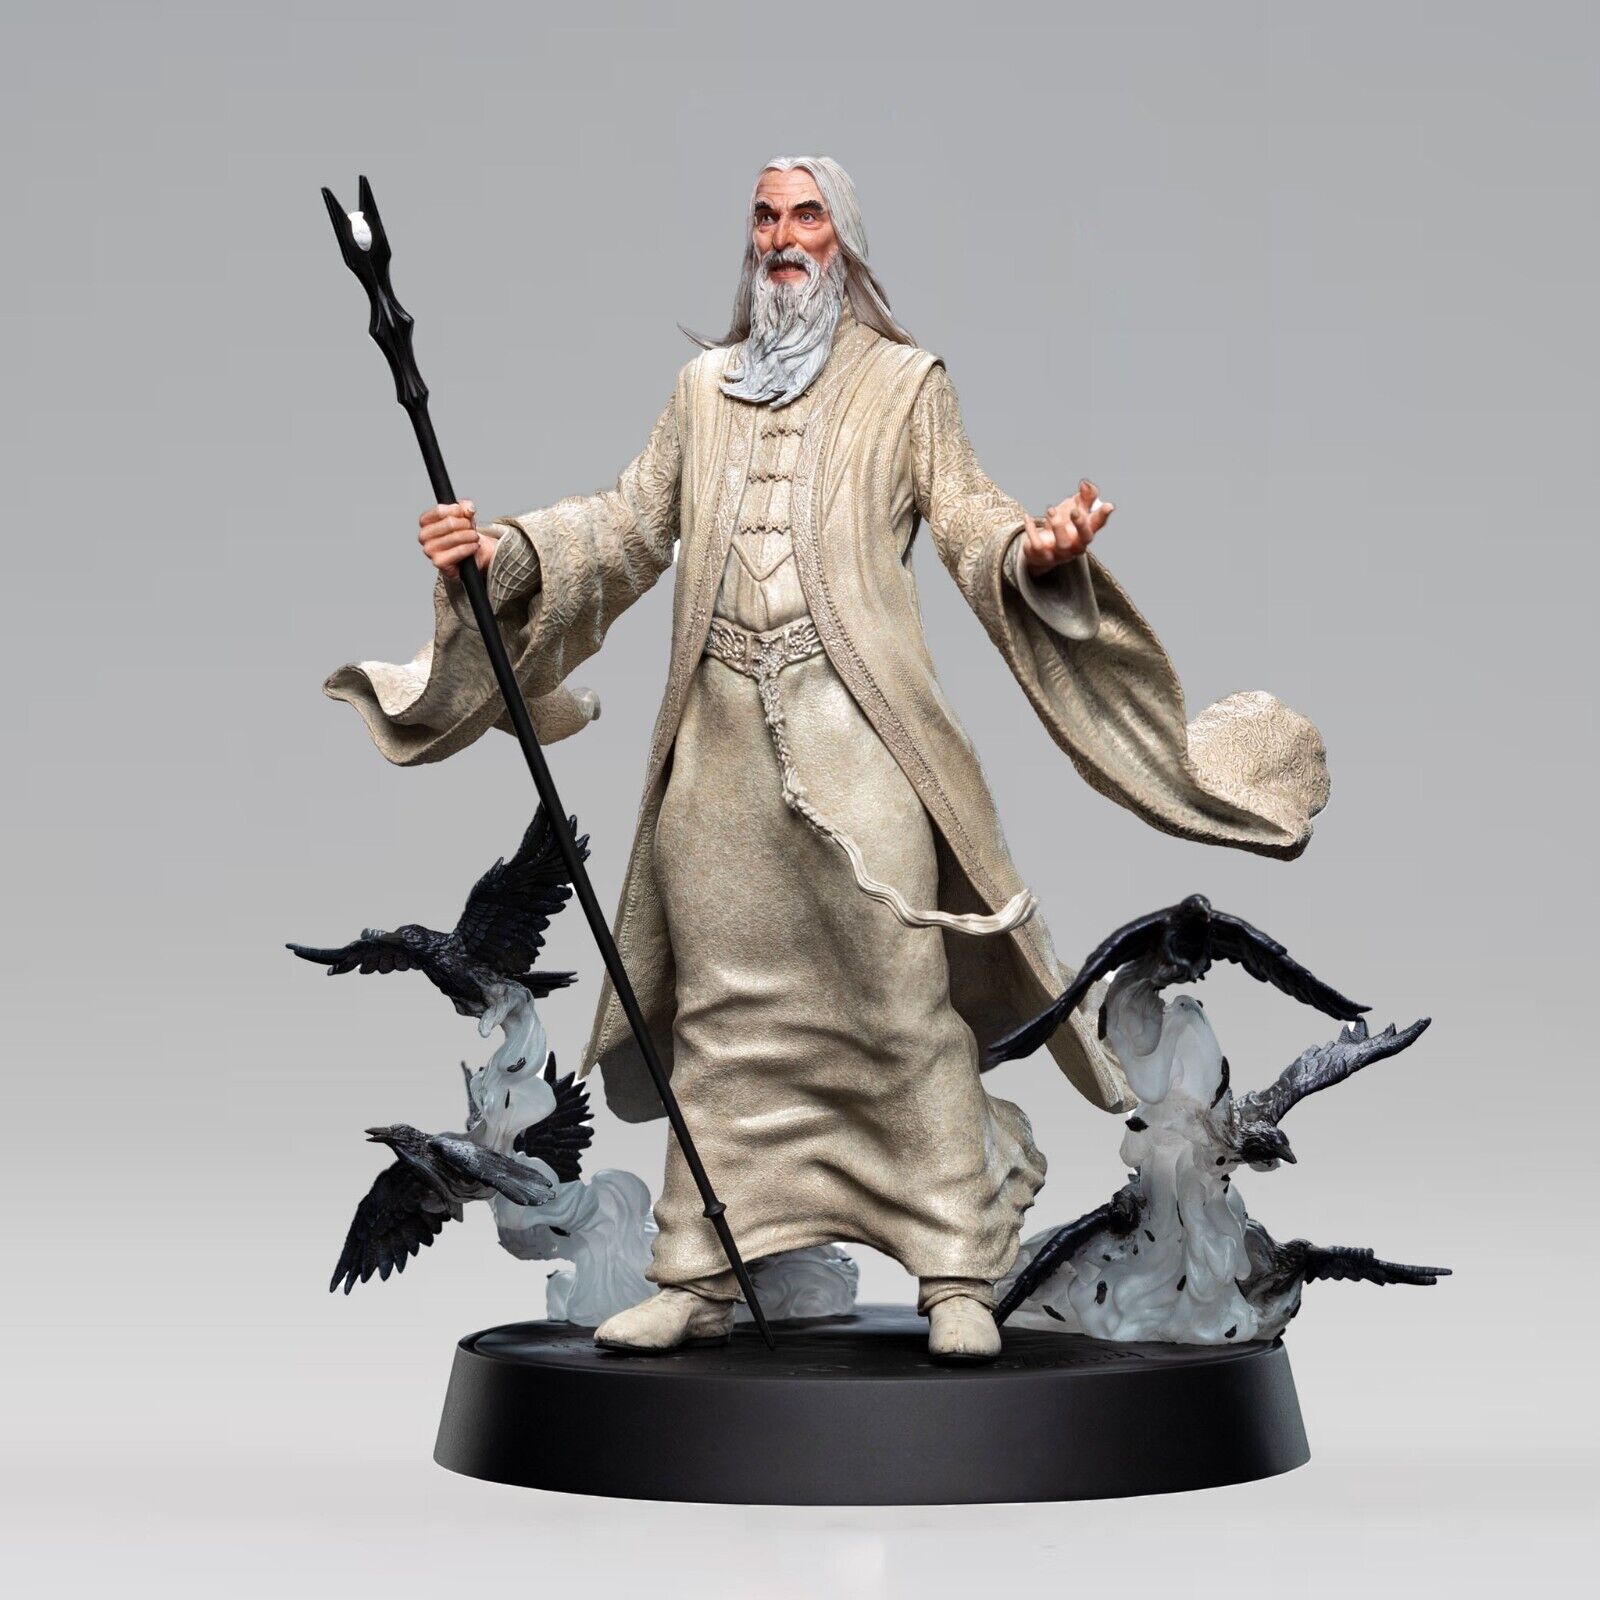 Saruman the White (The Lord of the Rings) Figures of Fandom Statue by Weta